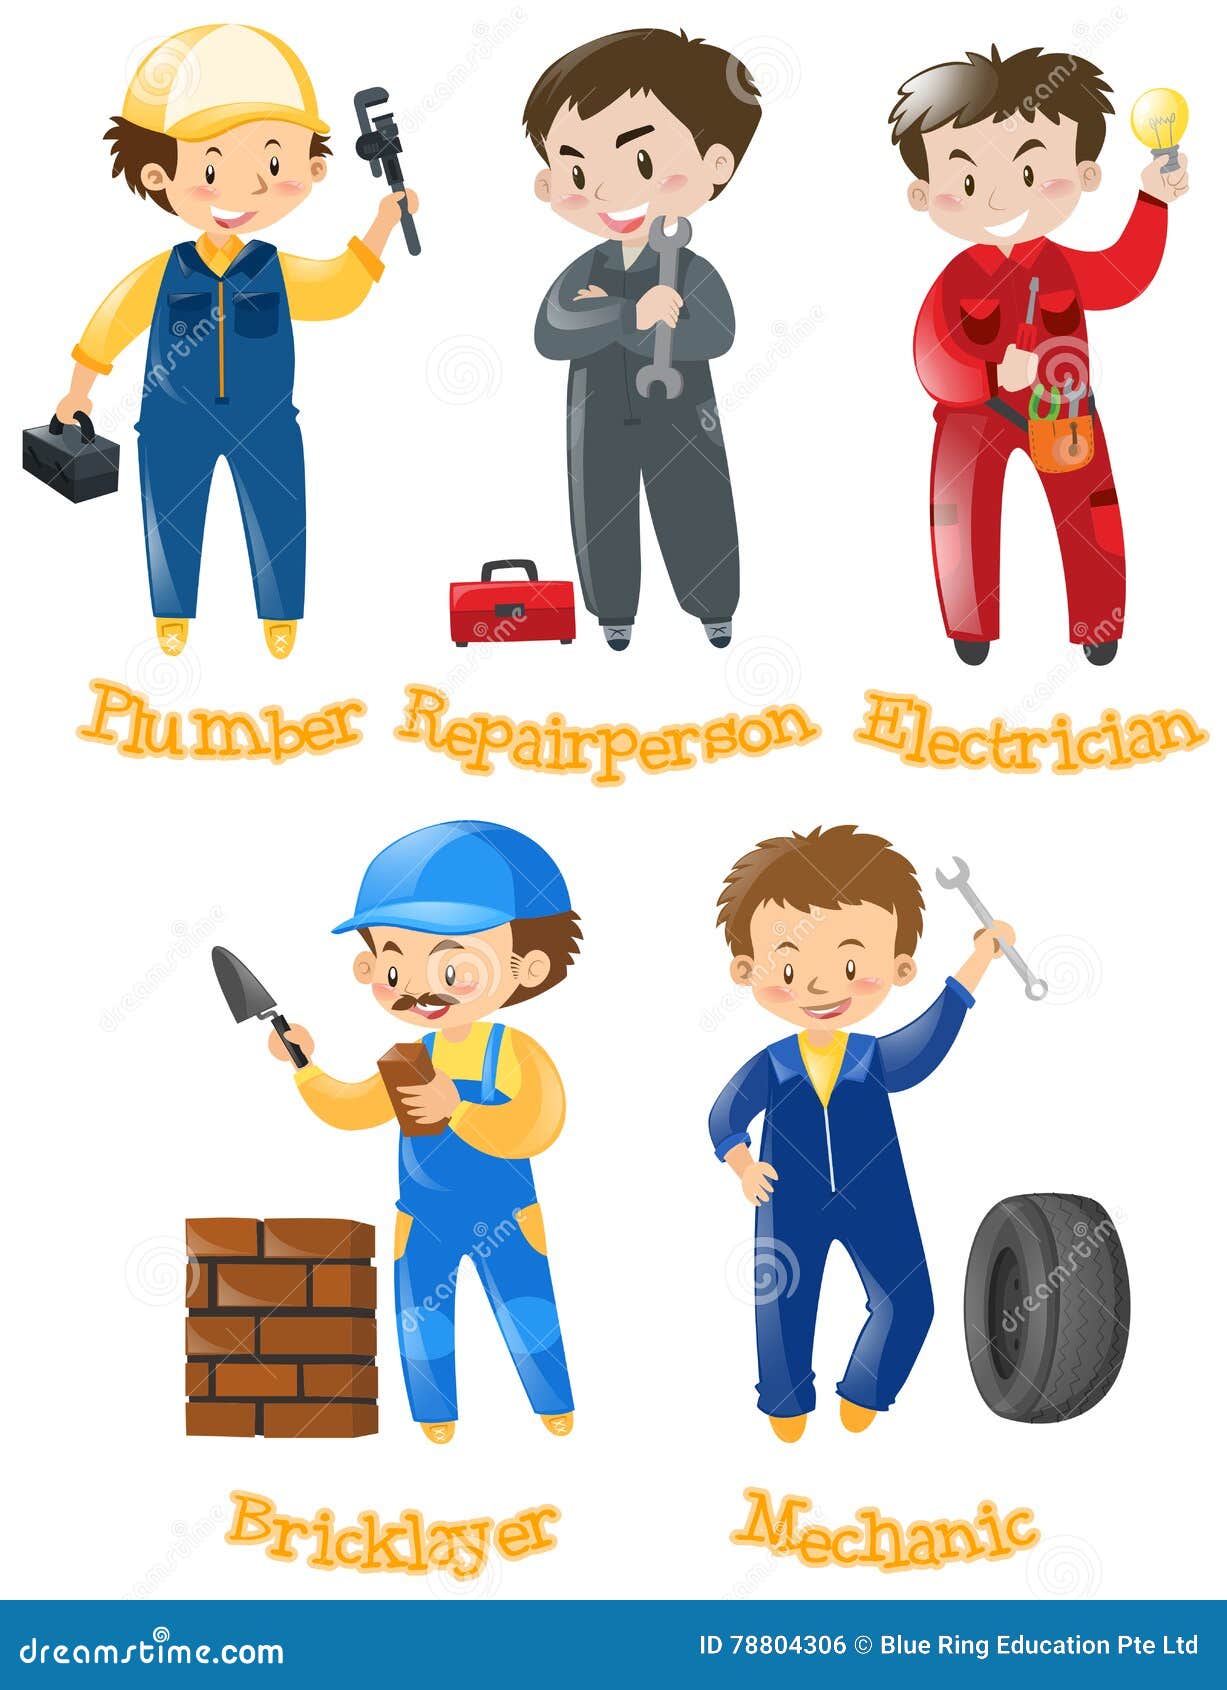 What Are the Different Types of Construction Jobs?